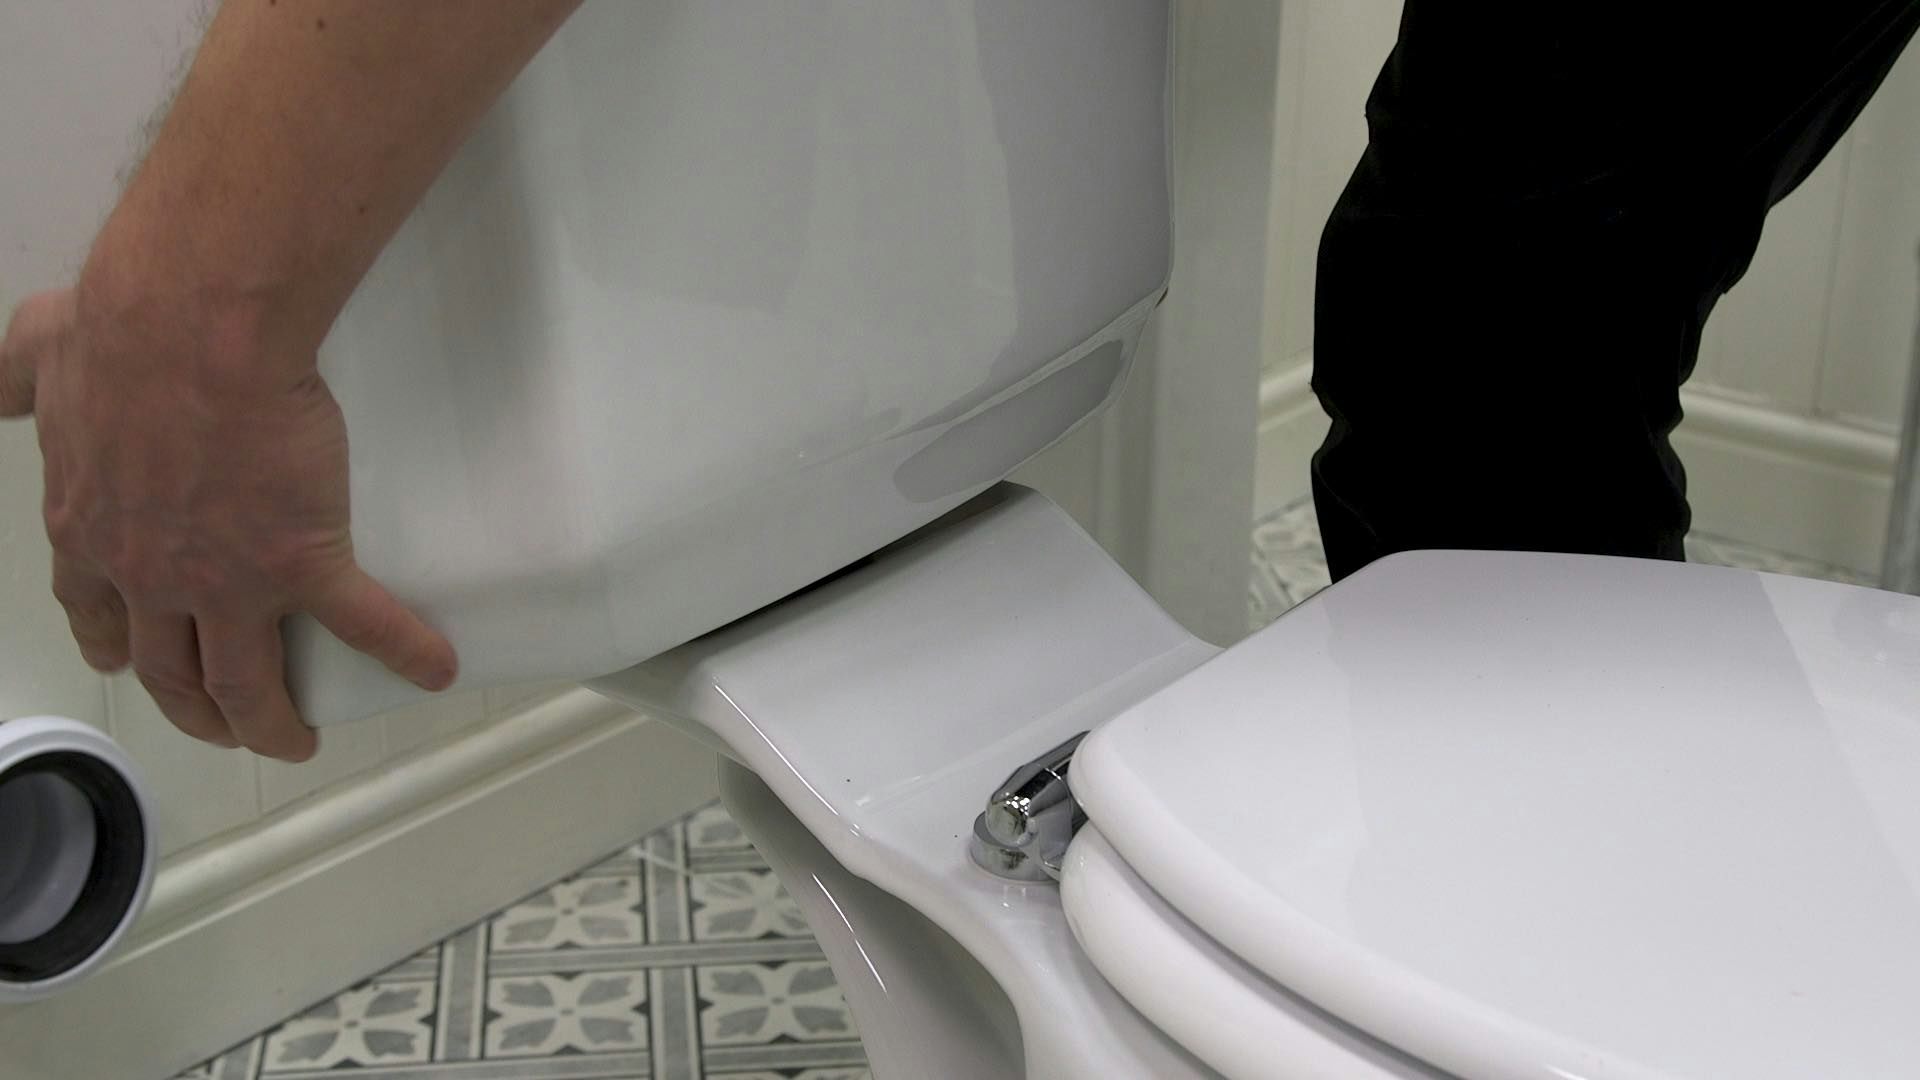 How to fit a toilet: Step-by-step instructions & video